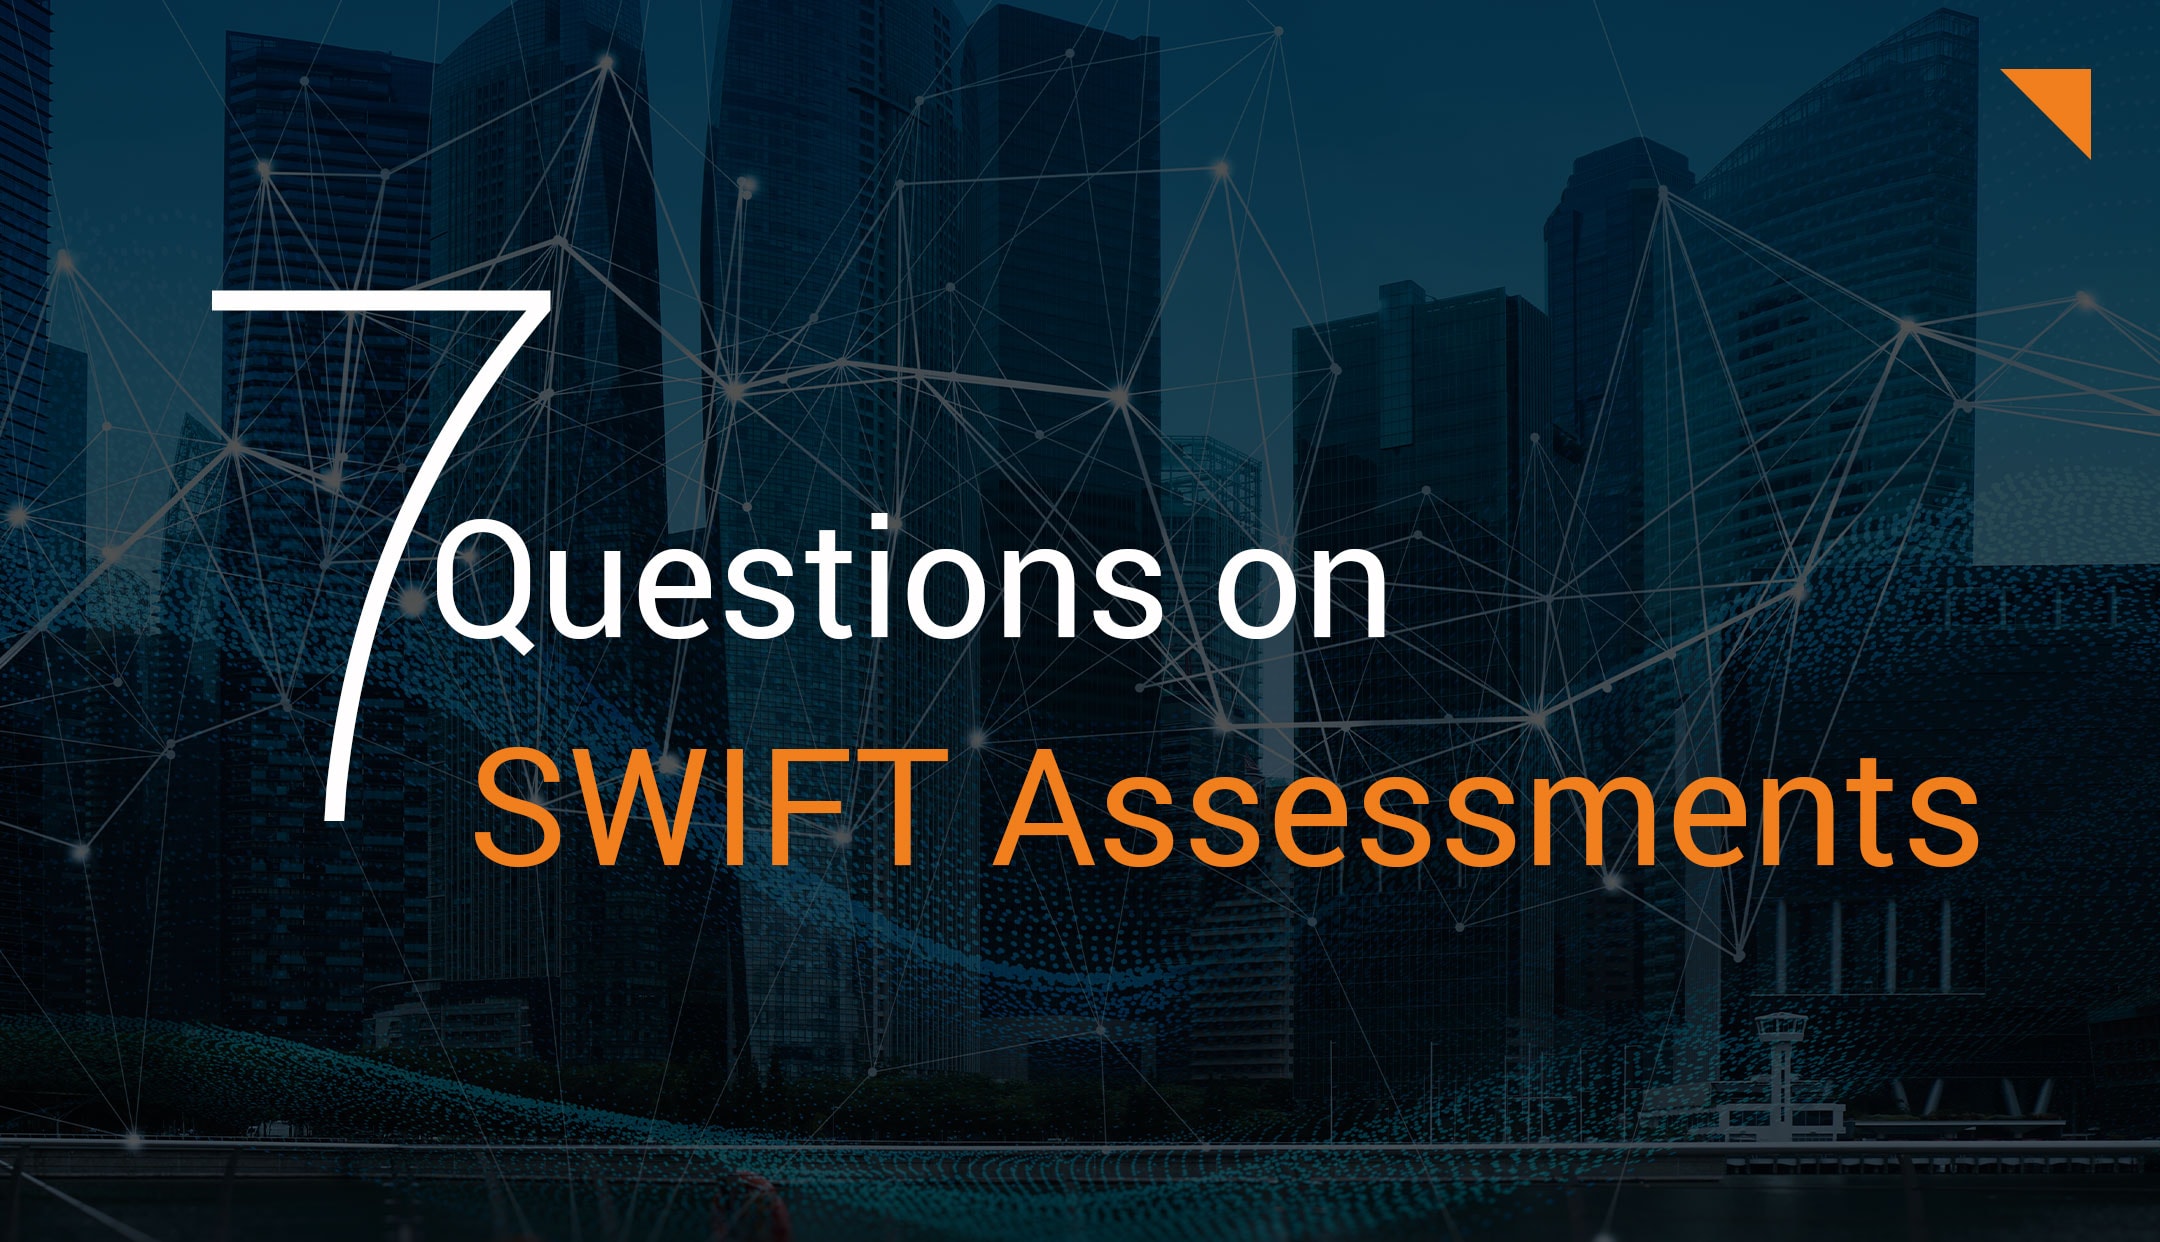 SWIFT Assessments: The 7 Most Important Questions